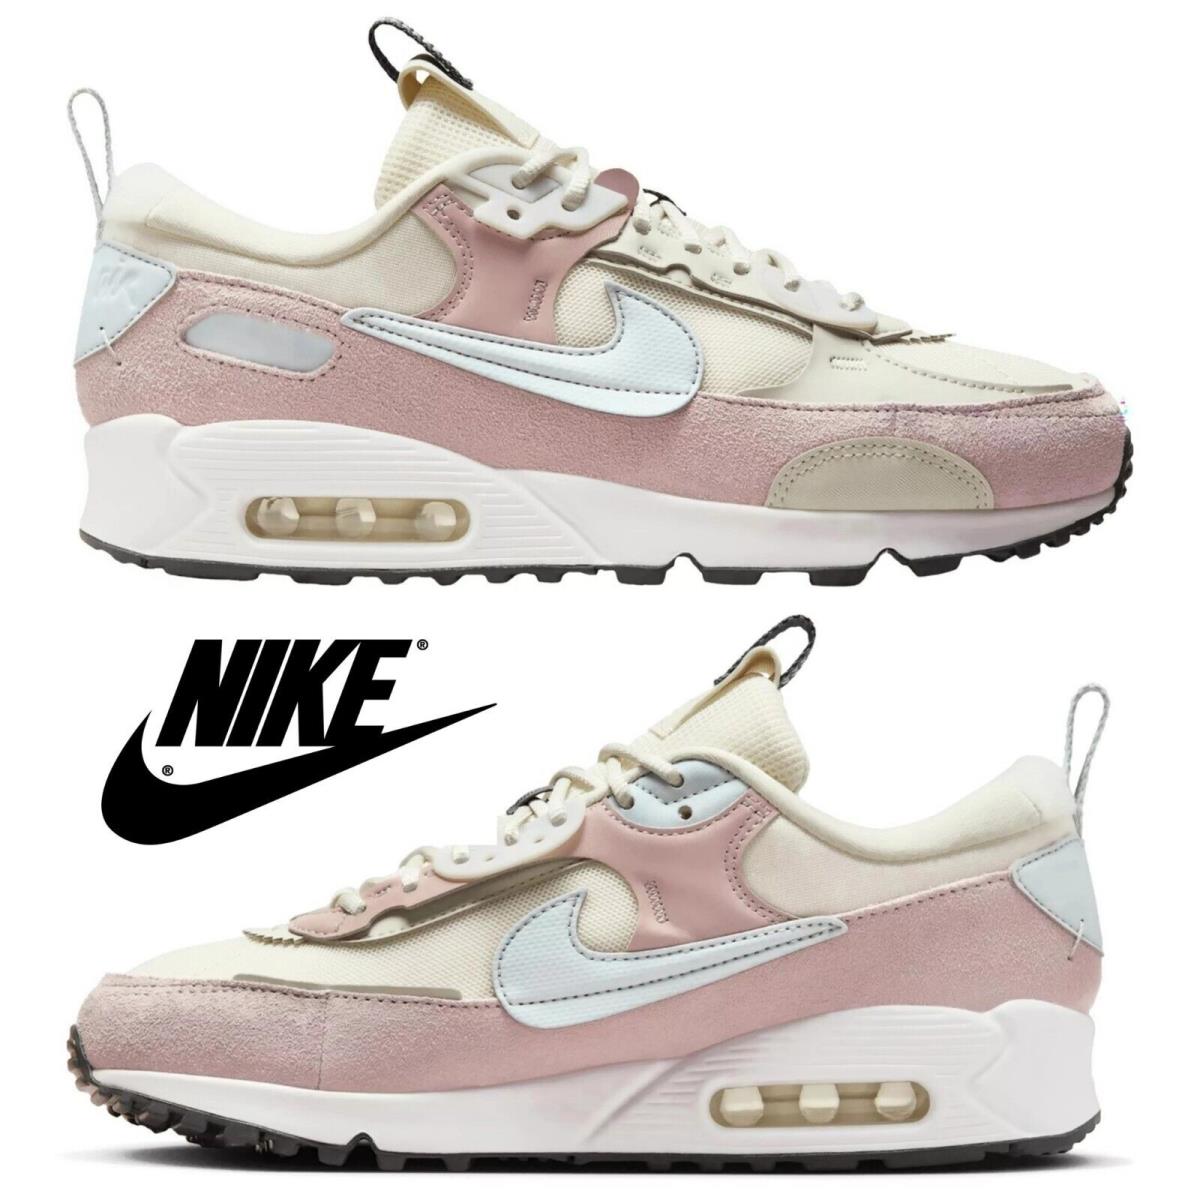 Nike Air Max 90 Futura Women`s Sneakers Sport Running Gym Comfort Athletic Shoes